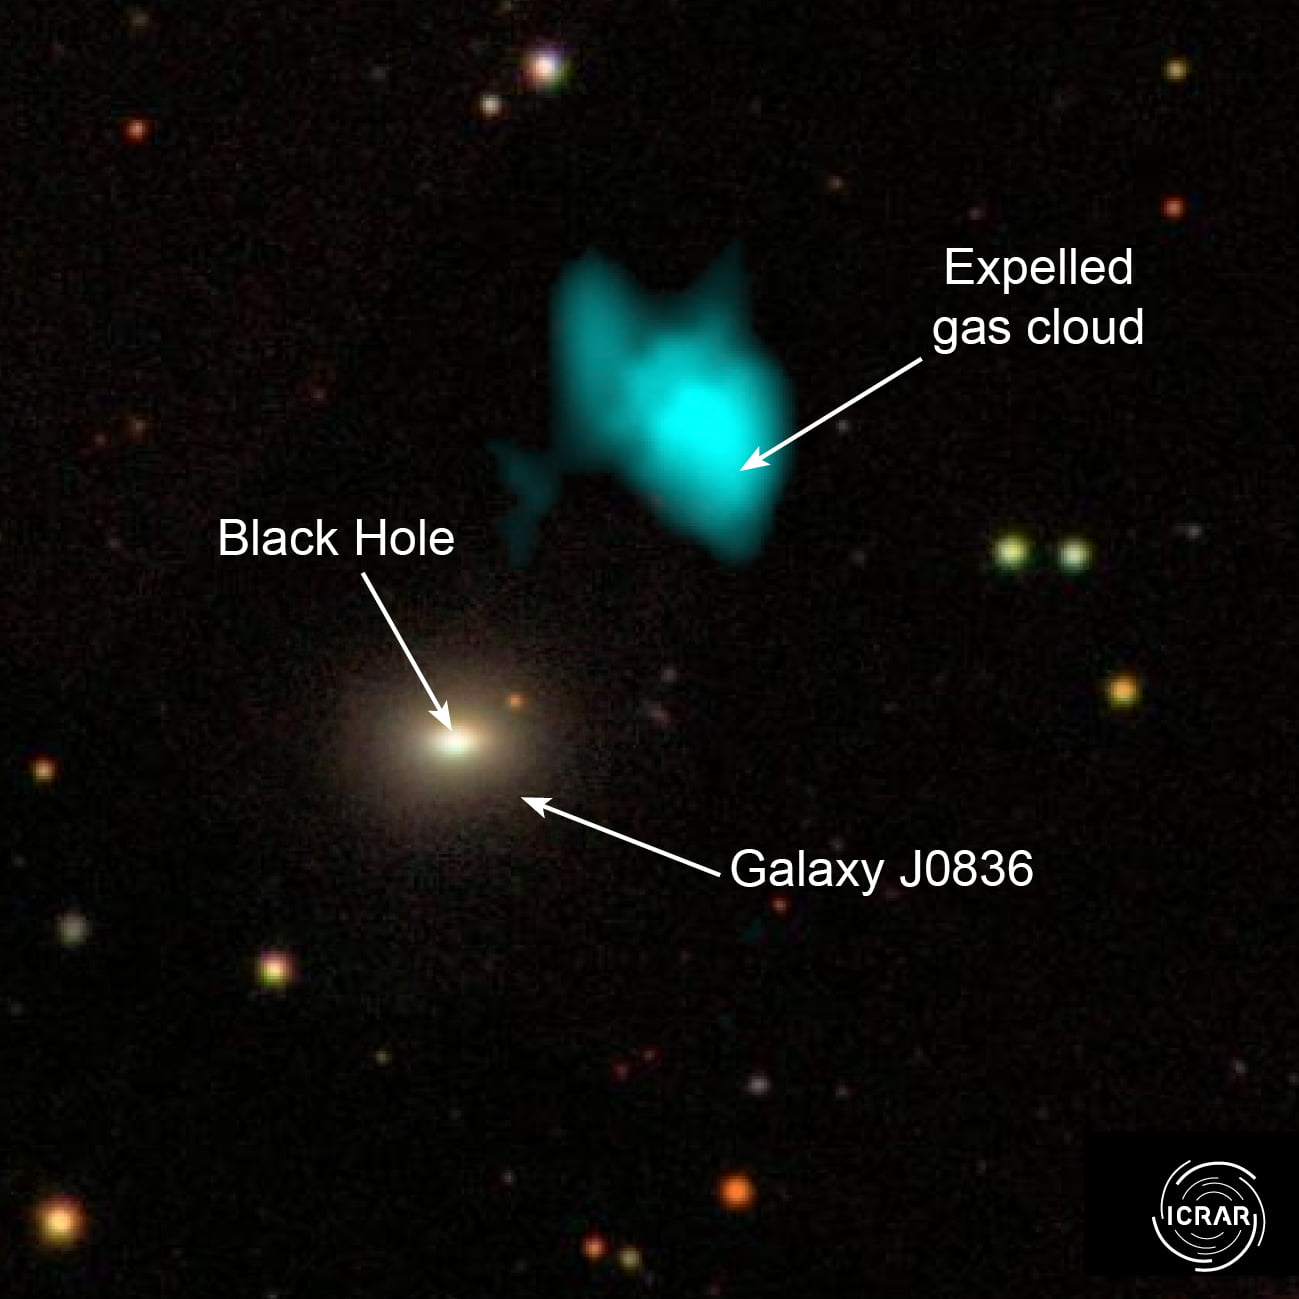     An image showing galaxy J0836, the approximate location of the black hole residing at the galaxy’s core, and the expelled gas reservoir. Credit: ICRAR. 